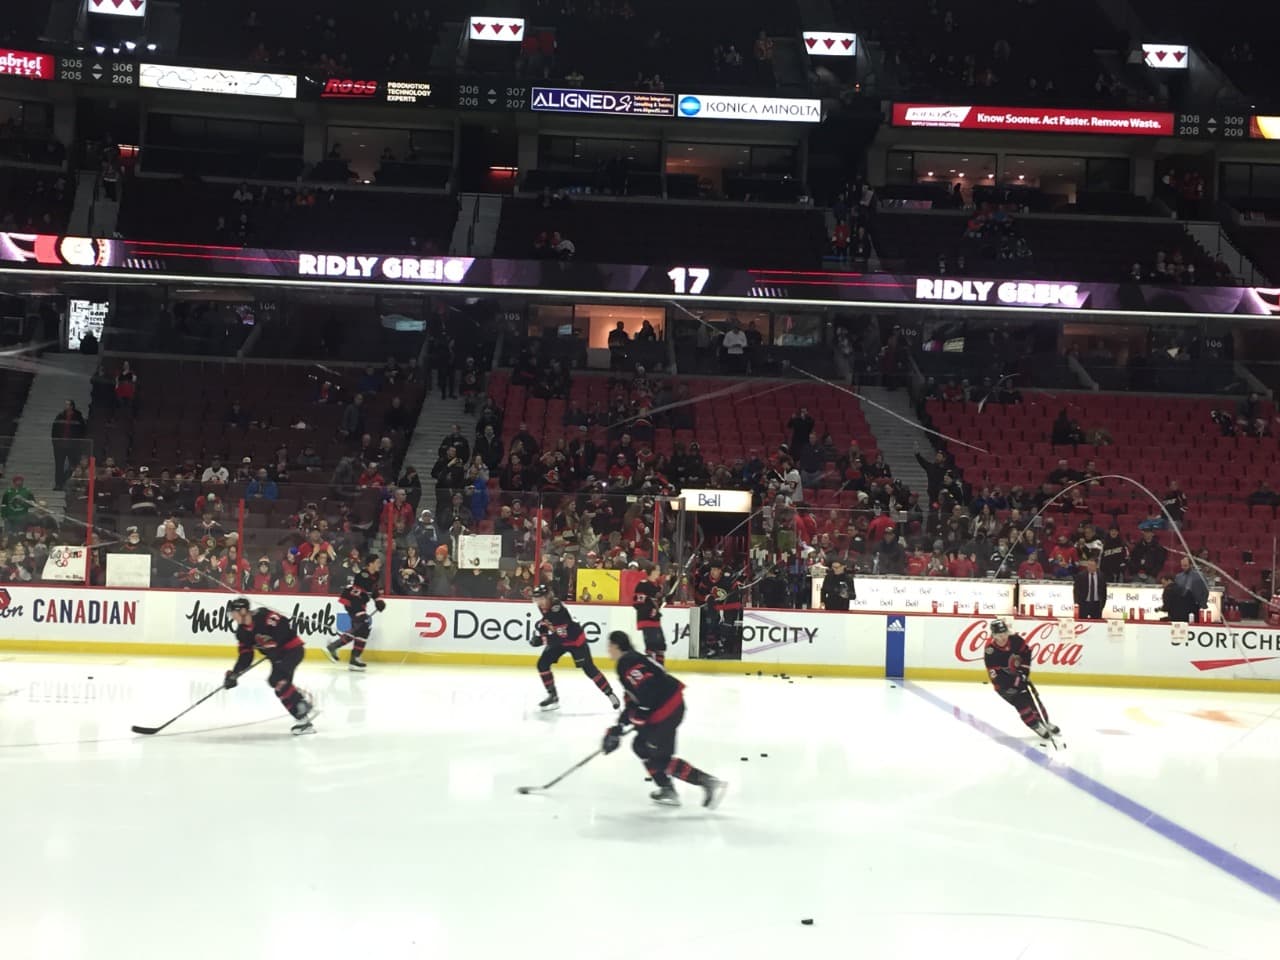 Sens players taking part in warmups before the game.